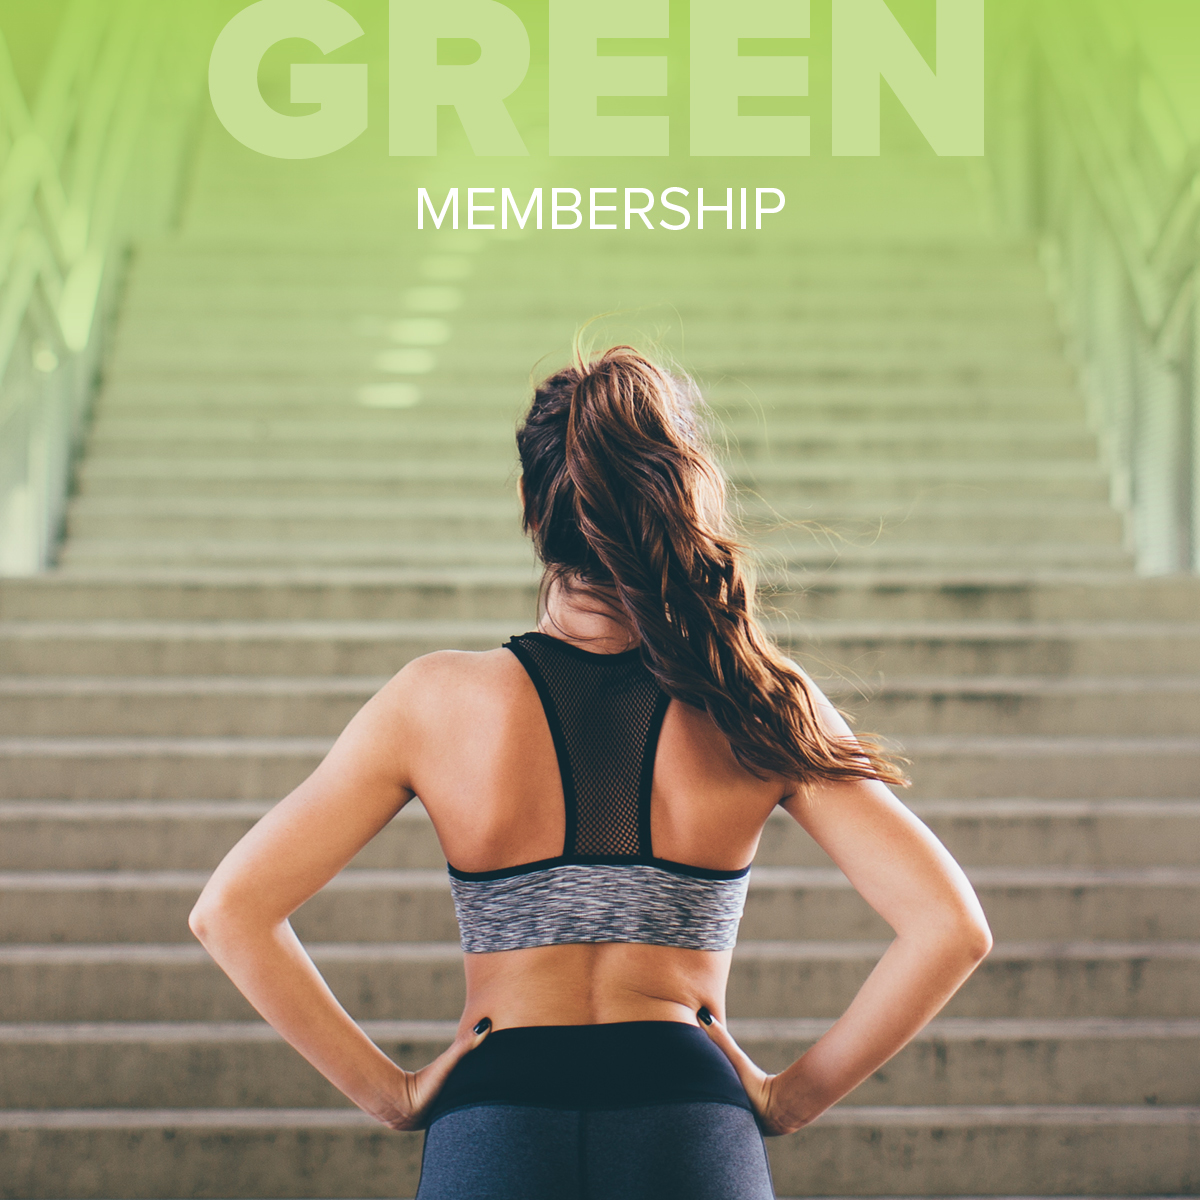 Green Membership tile with a woman's back wearing sports bra looking up stairs